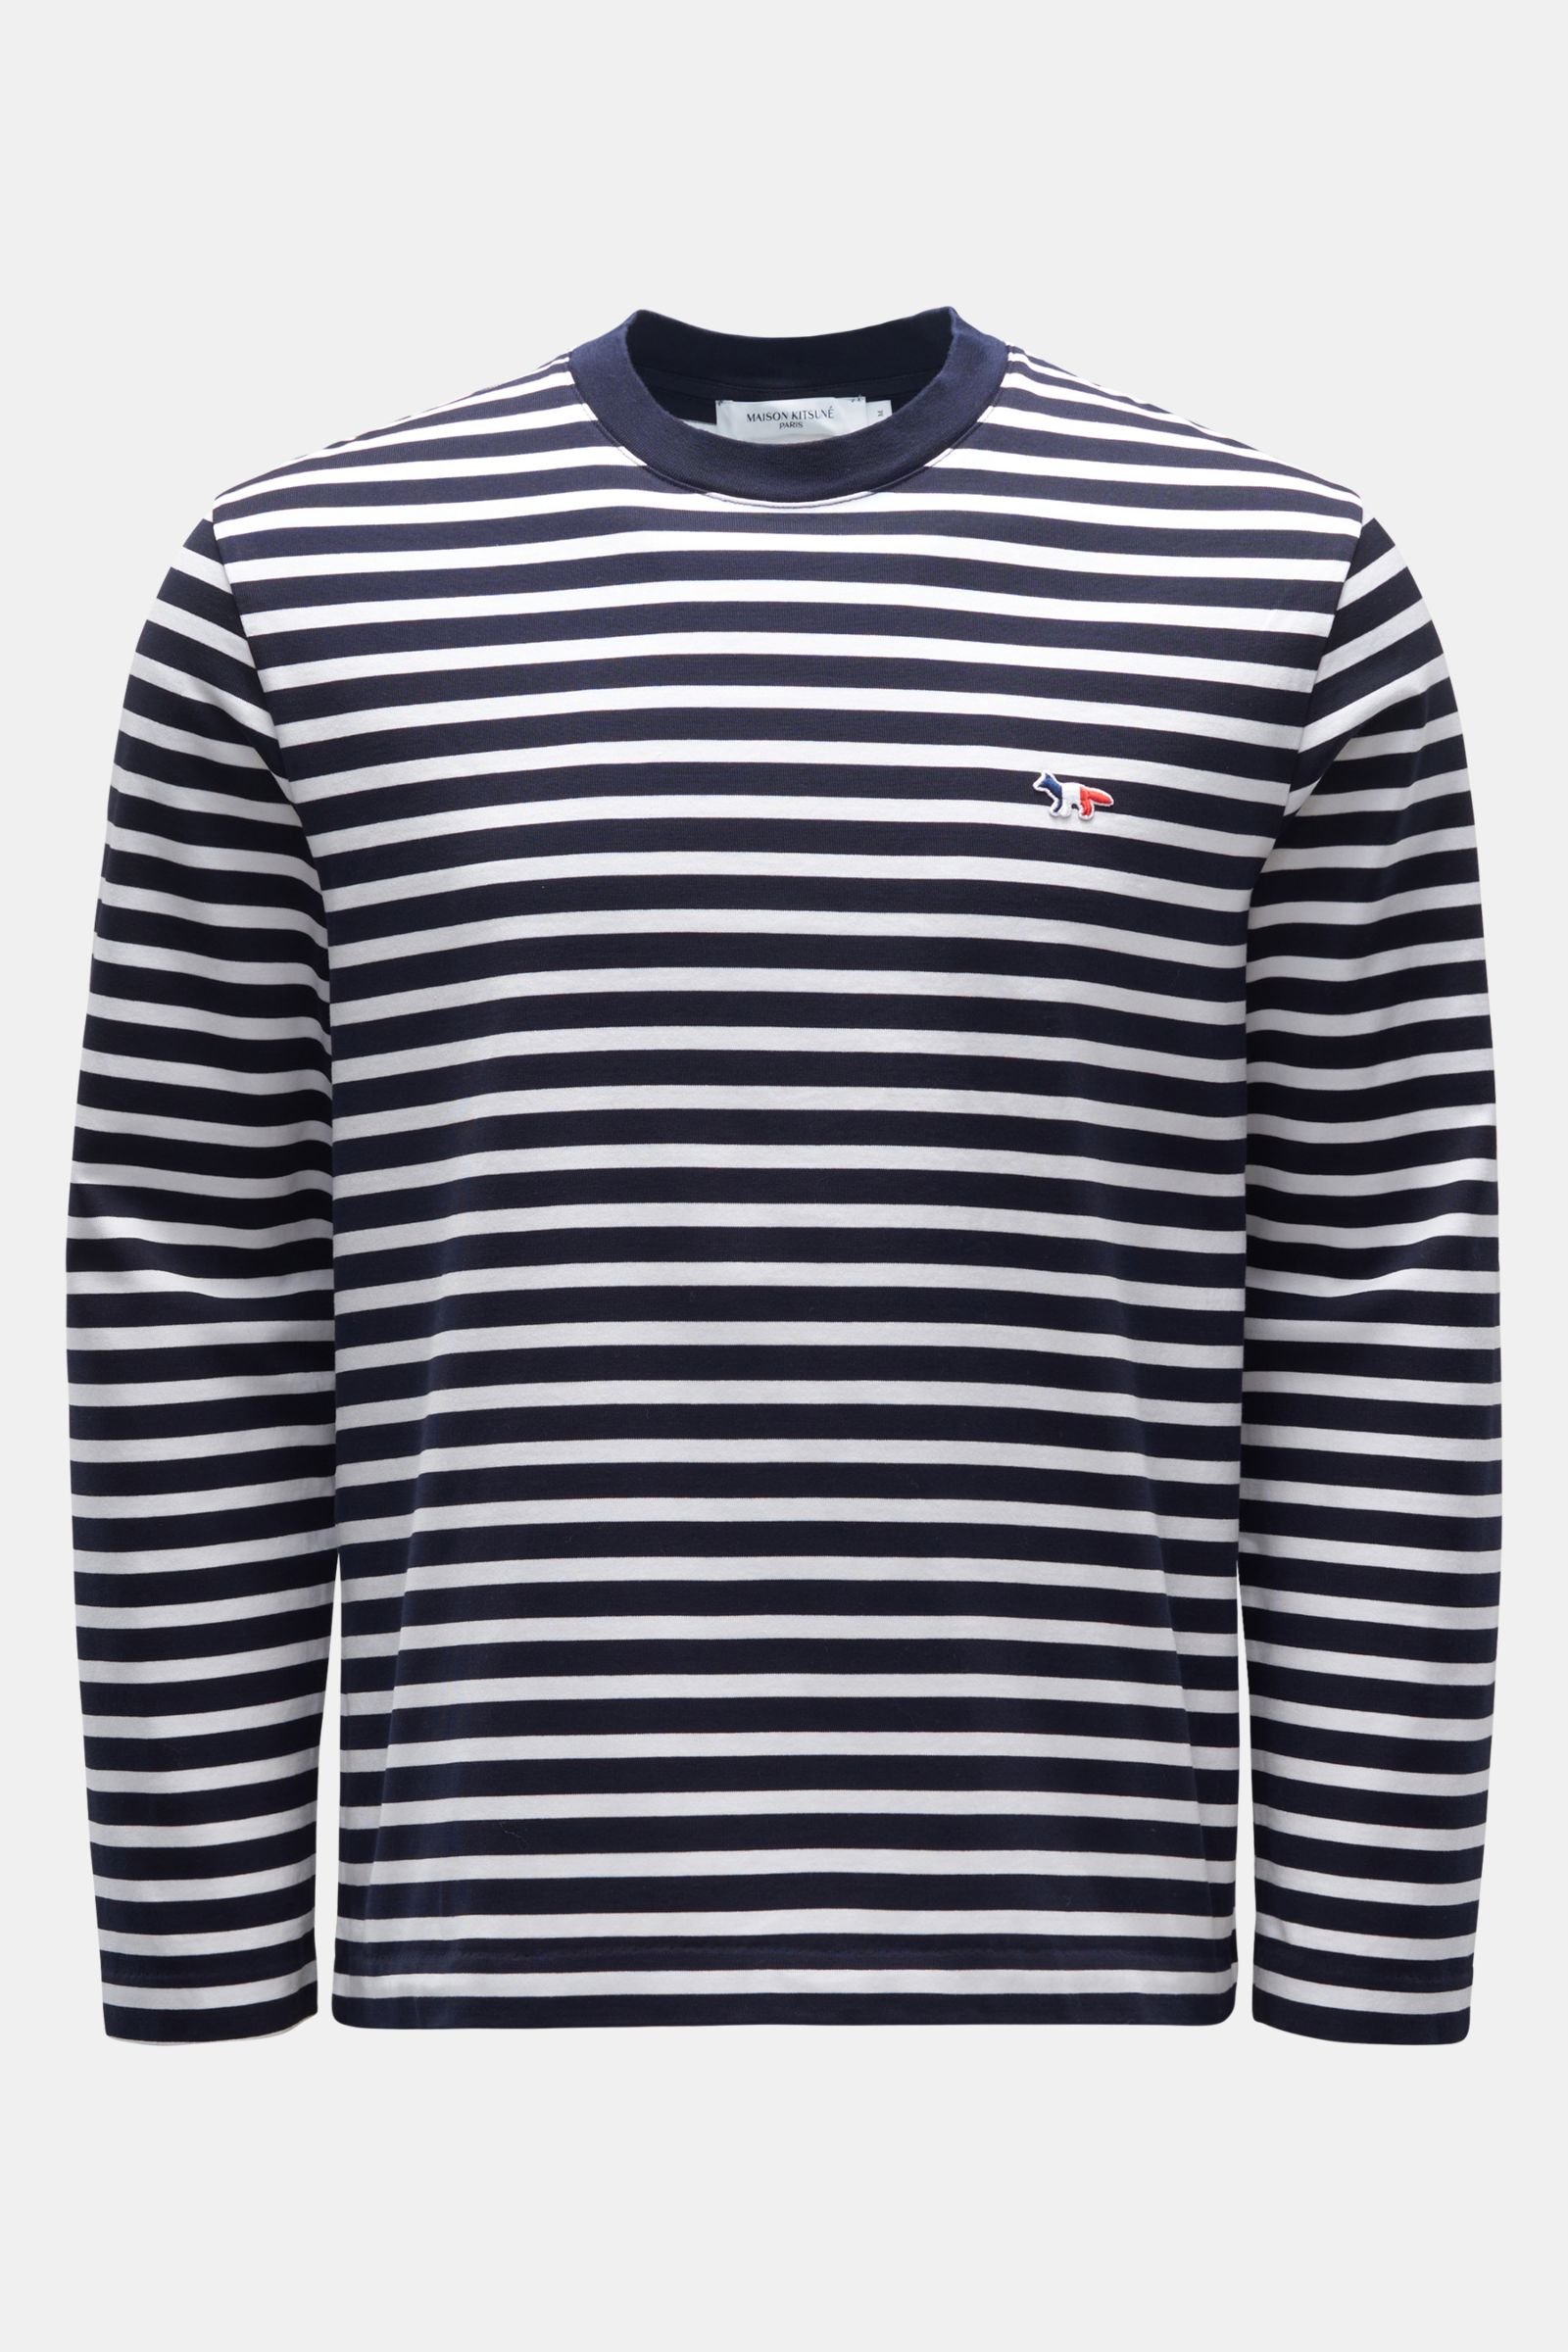 Long sleeve top 'Tricolor' navy/white striped